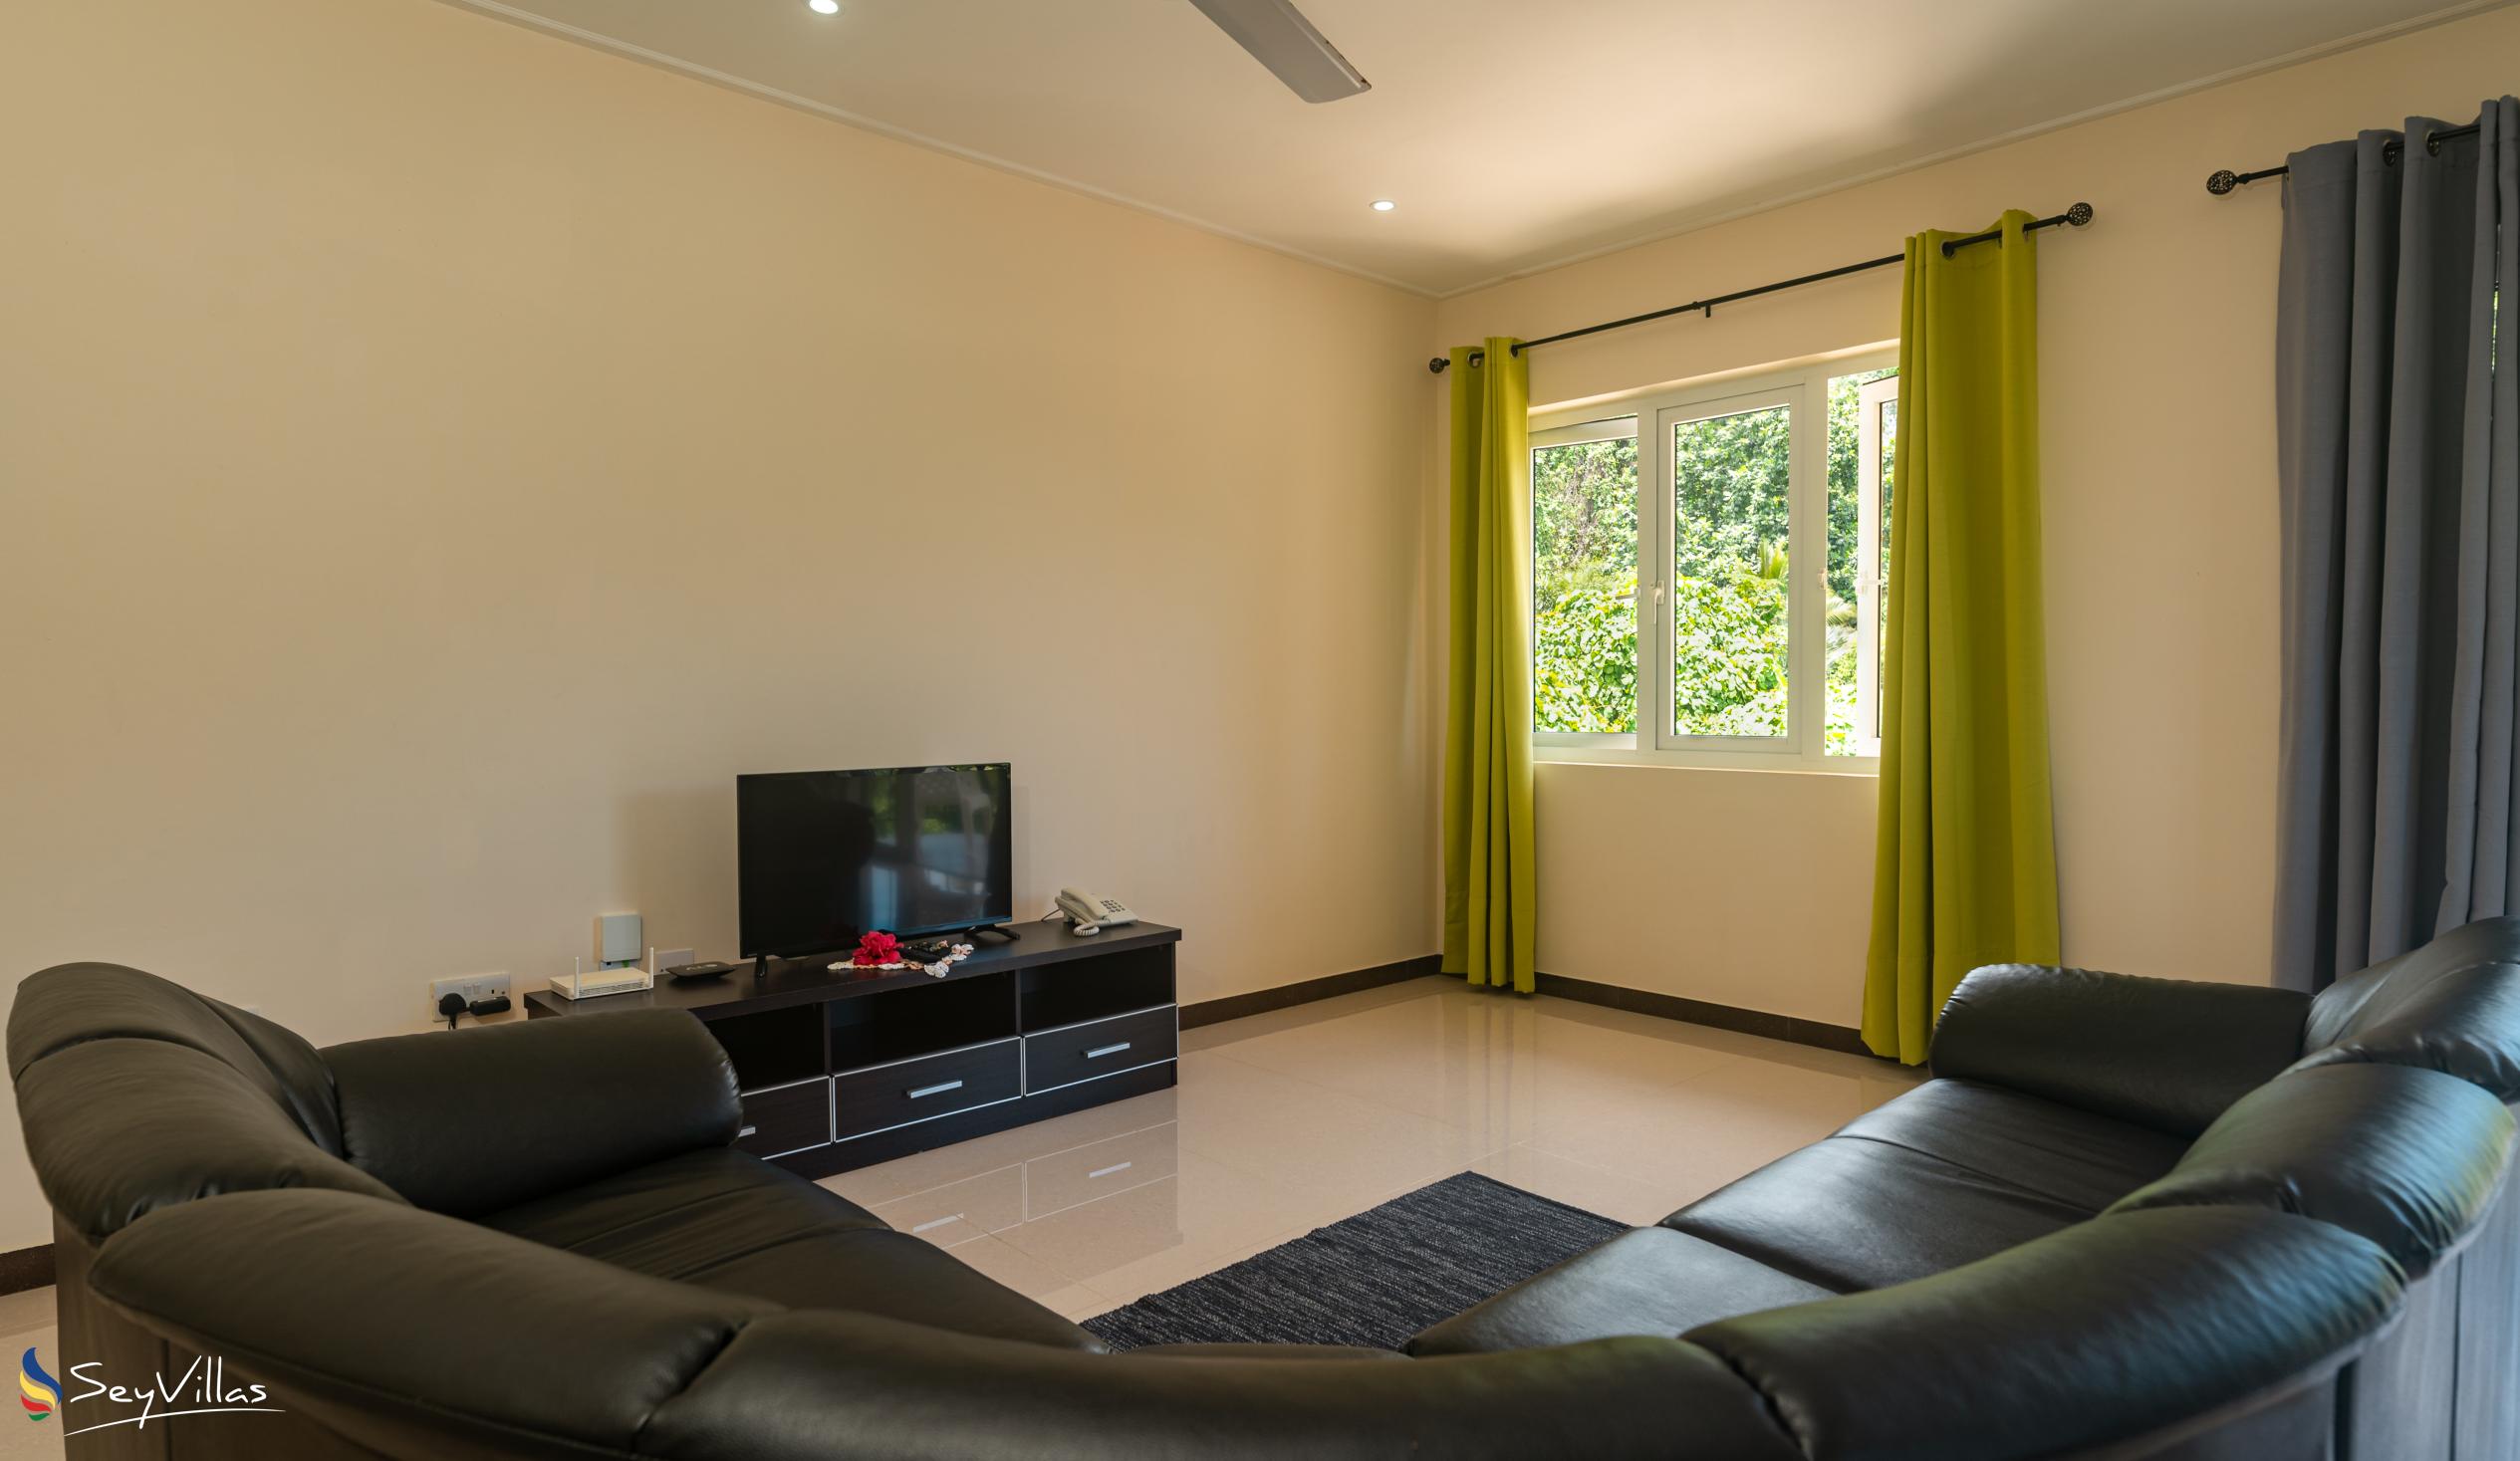 Foto 43: JAIDSS Holiday Apartments - Appartement 2 chambres - Mahé (Seychelles)